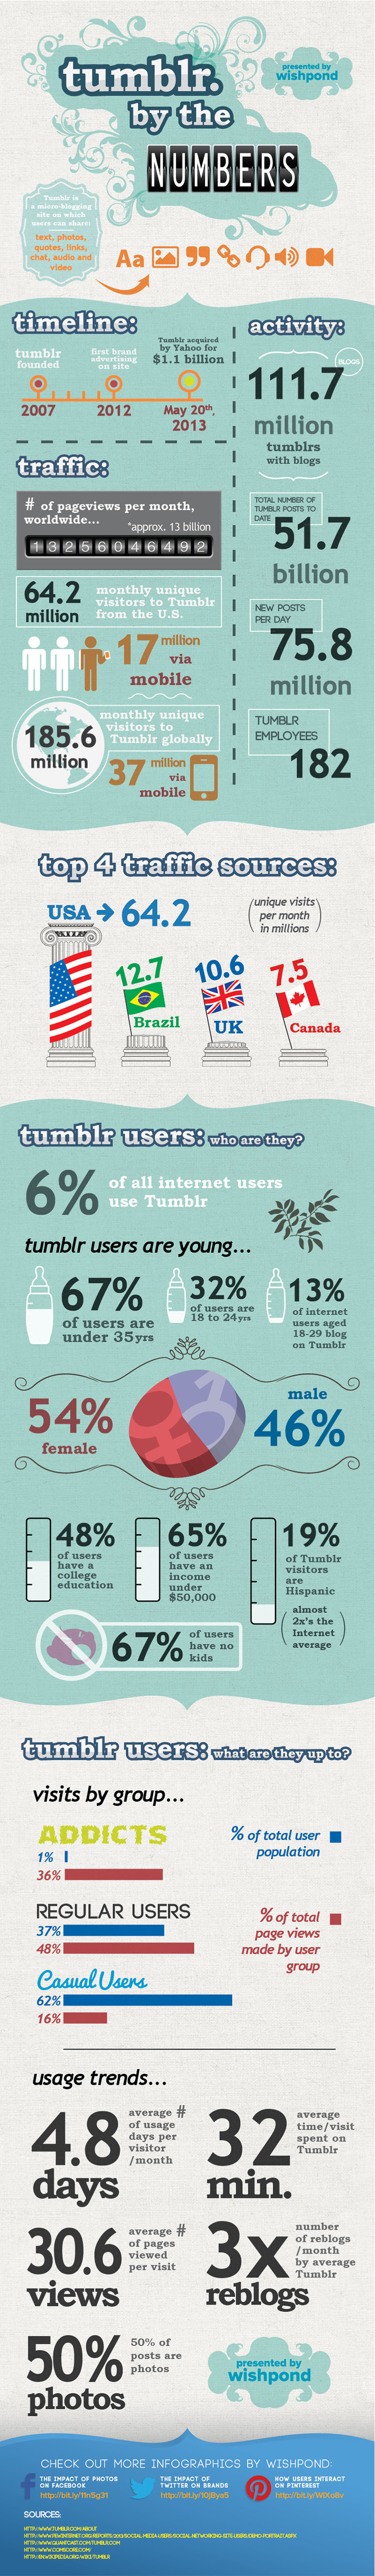 Tumblr by the Numbers